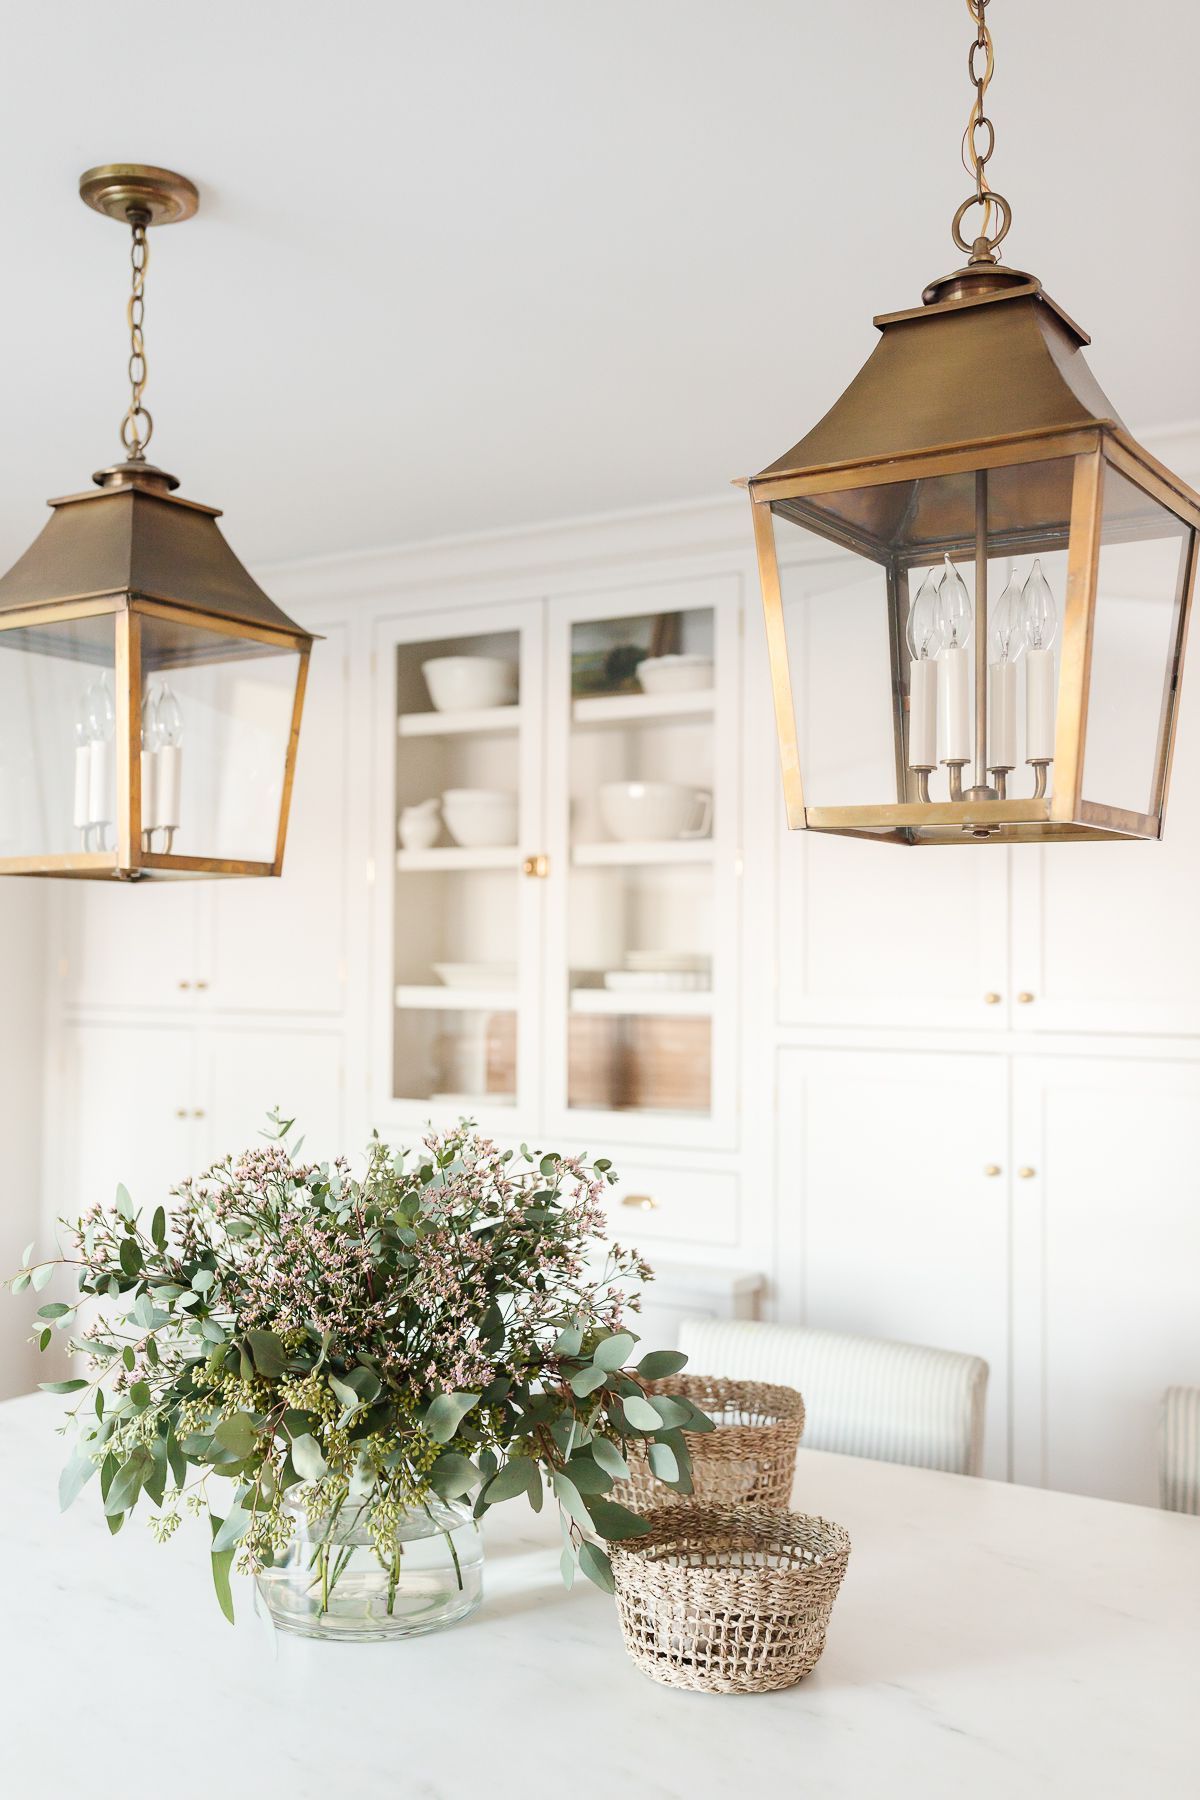 Julie Blanner With Regard To Current Natural Brass Lantern Chandeliers (View 2 of 15)